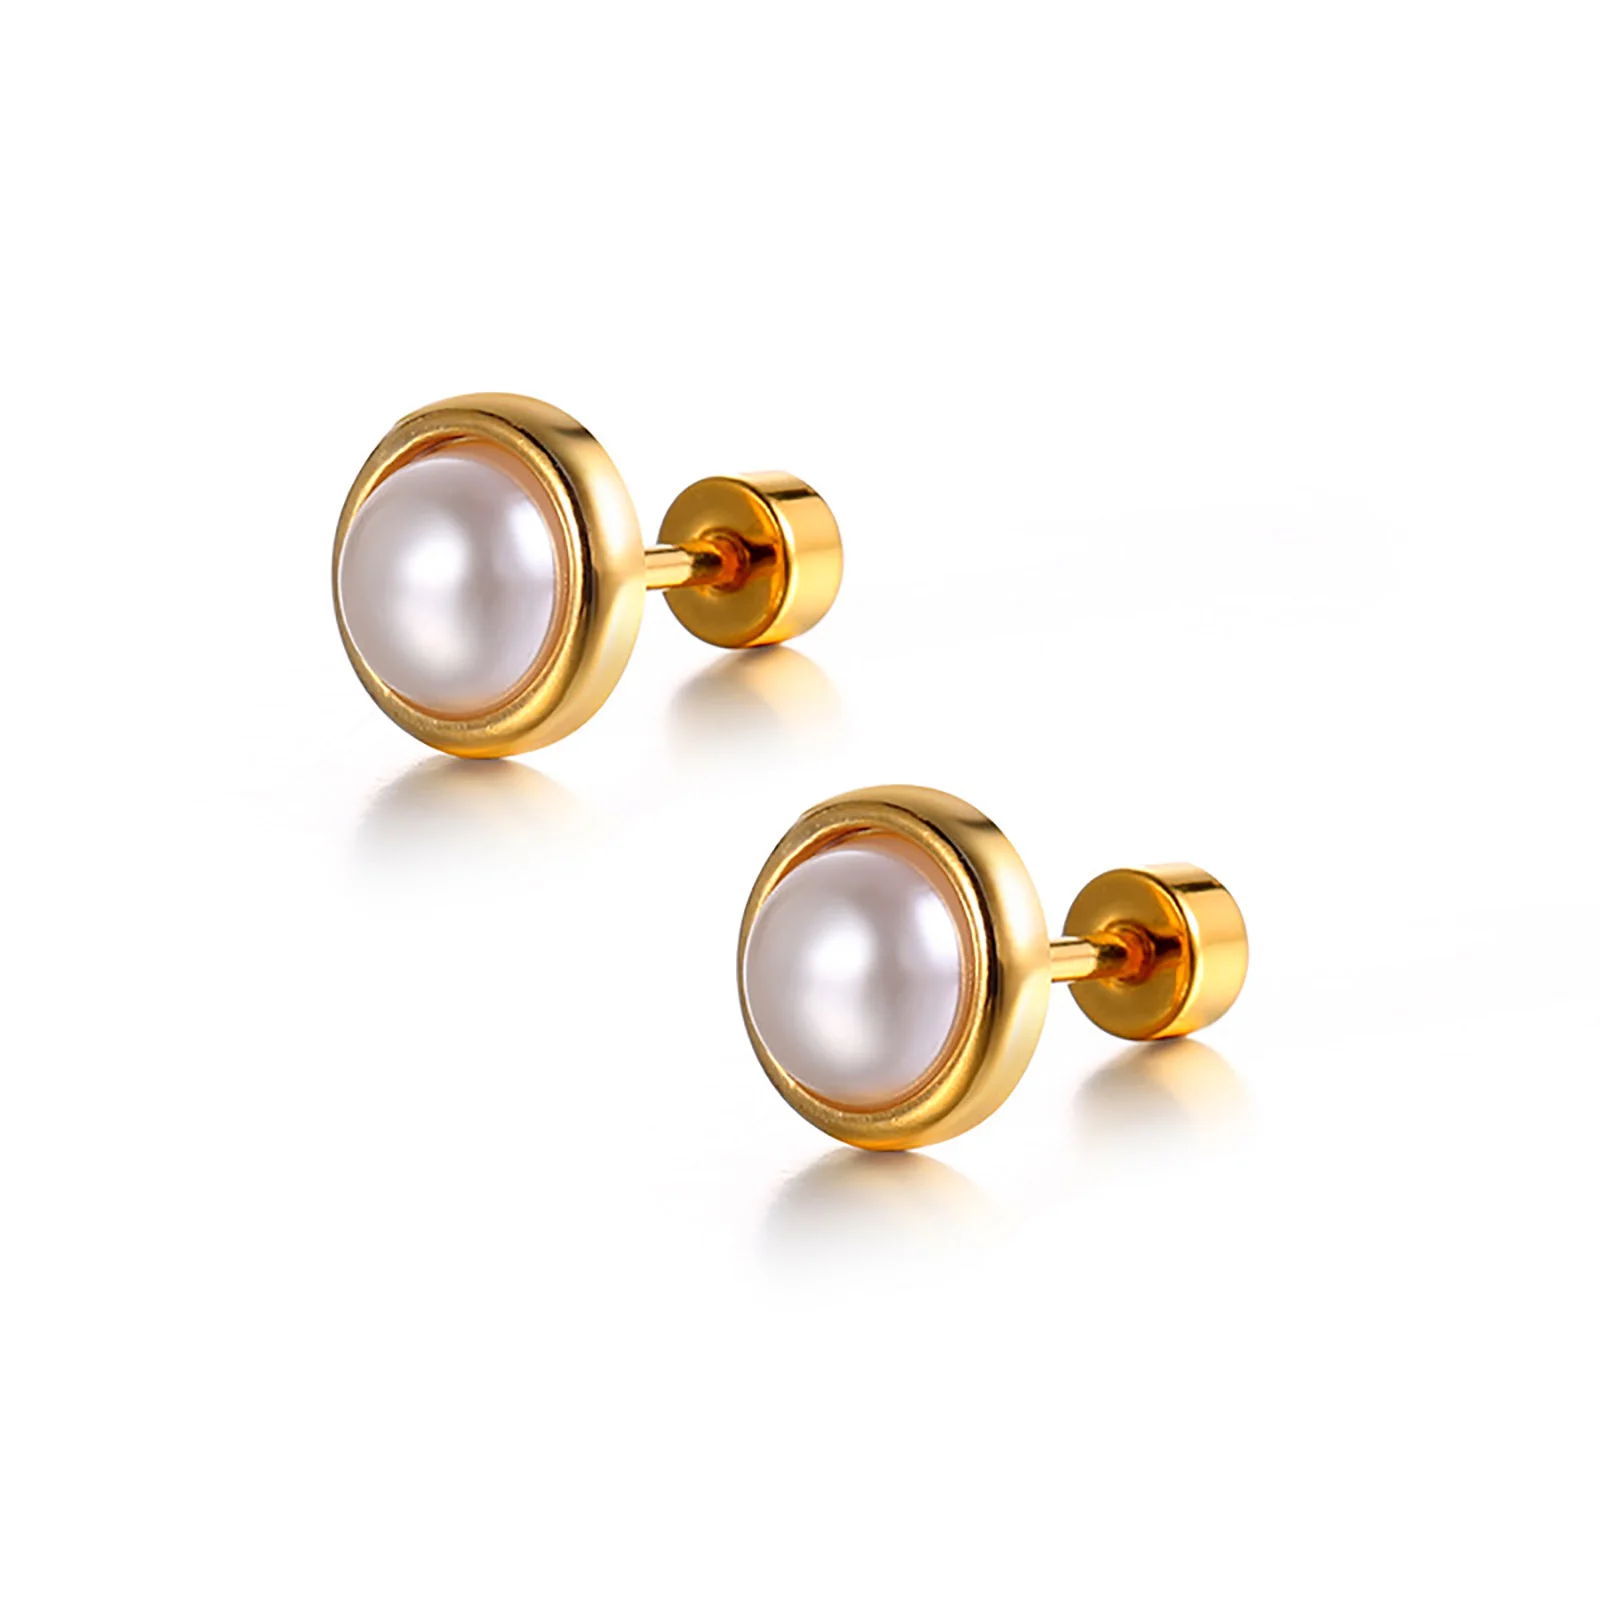 WOMEN PEARL STUD EARRING TINY SMALL CIRCLE EAR STAINLESS STEEL JEWELRY